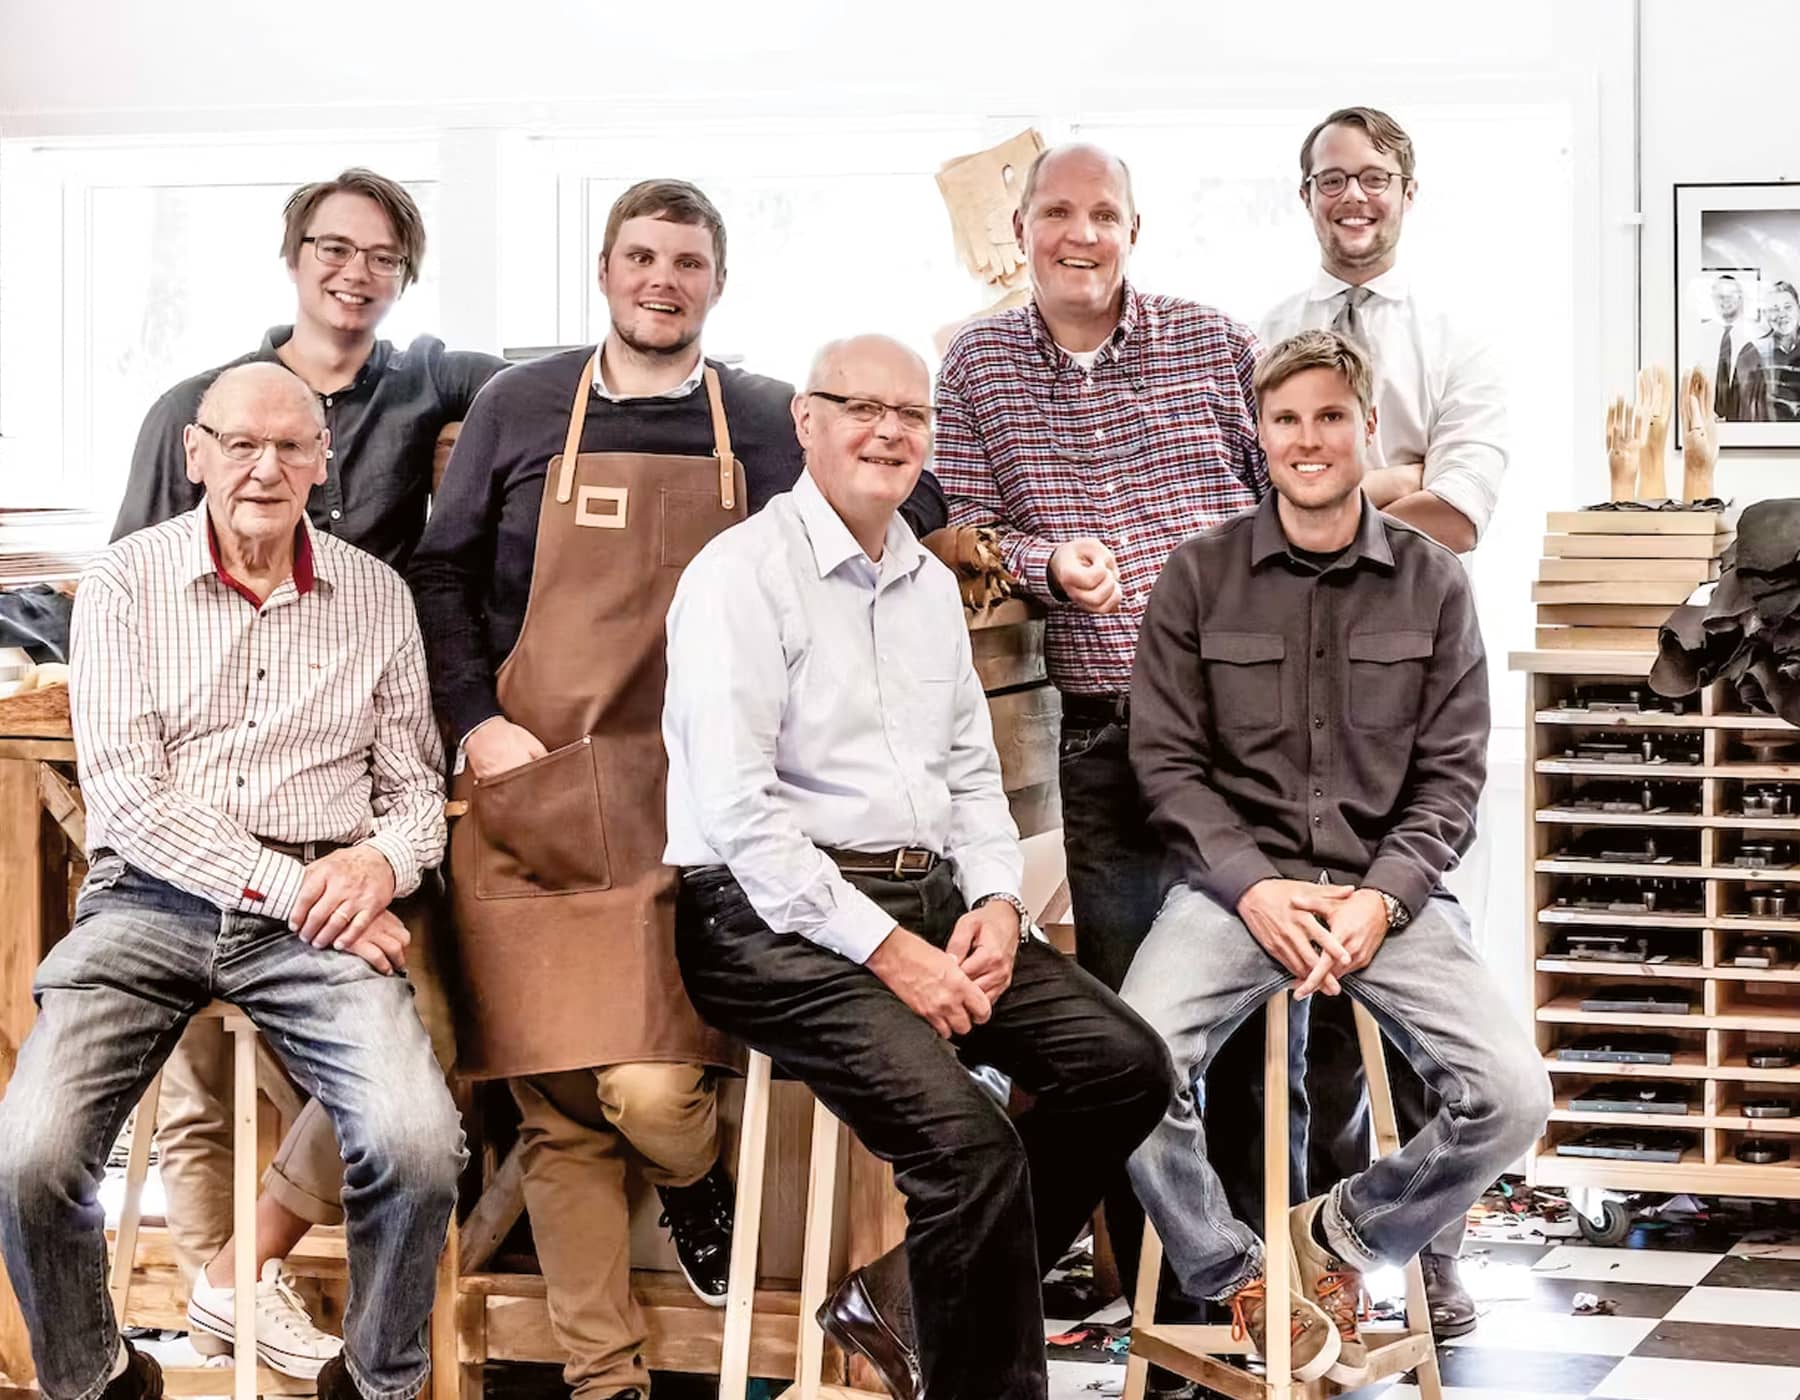 7 members of the Martin Magnusson & Co family who originated and continue to operate Hestra, in one of their workshops sitting on stools an standing for a photo. 